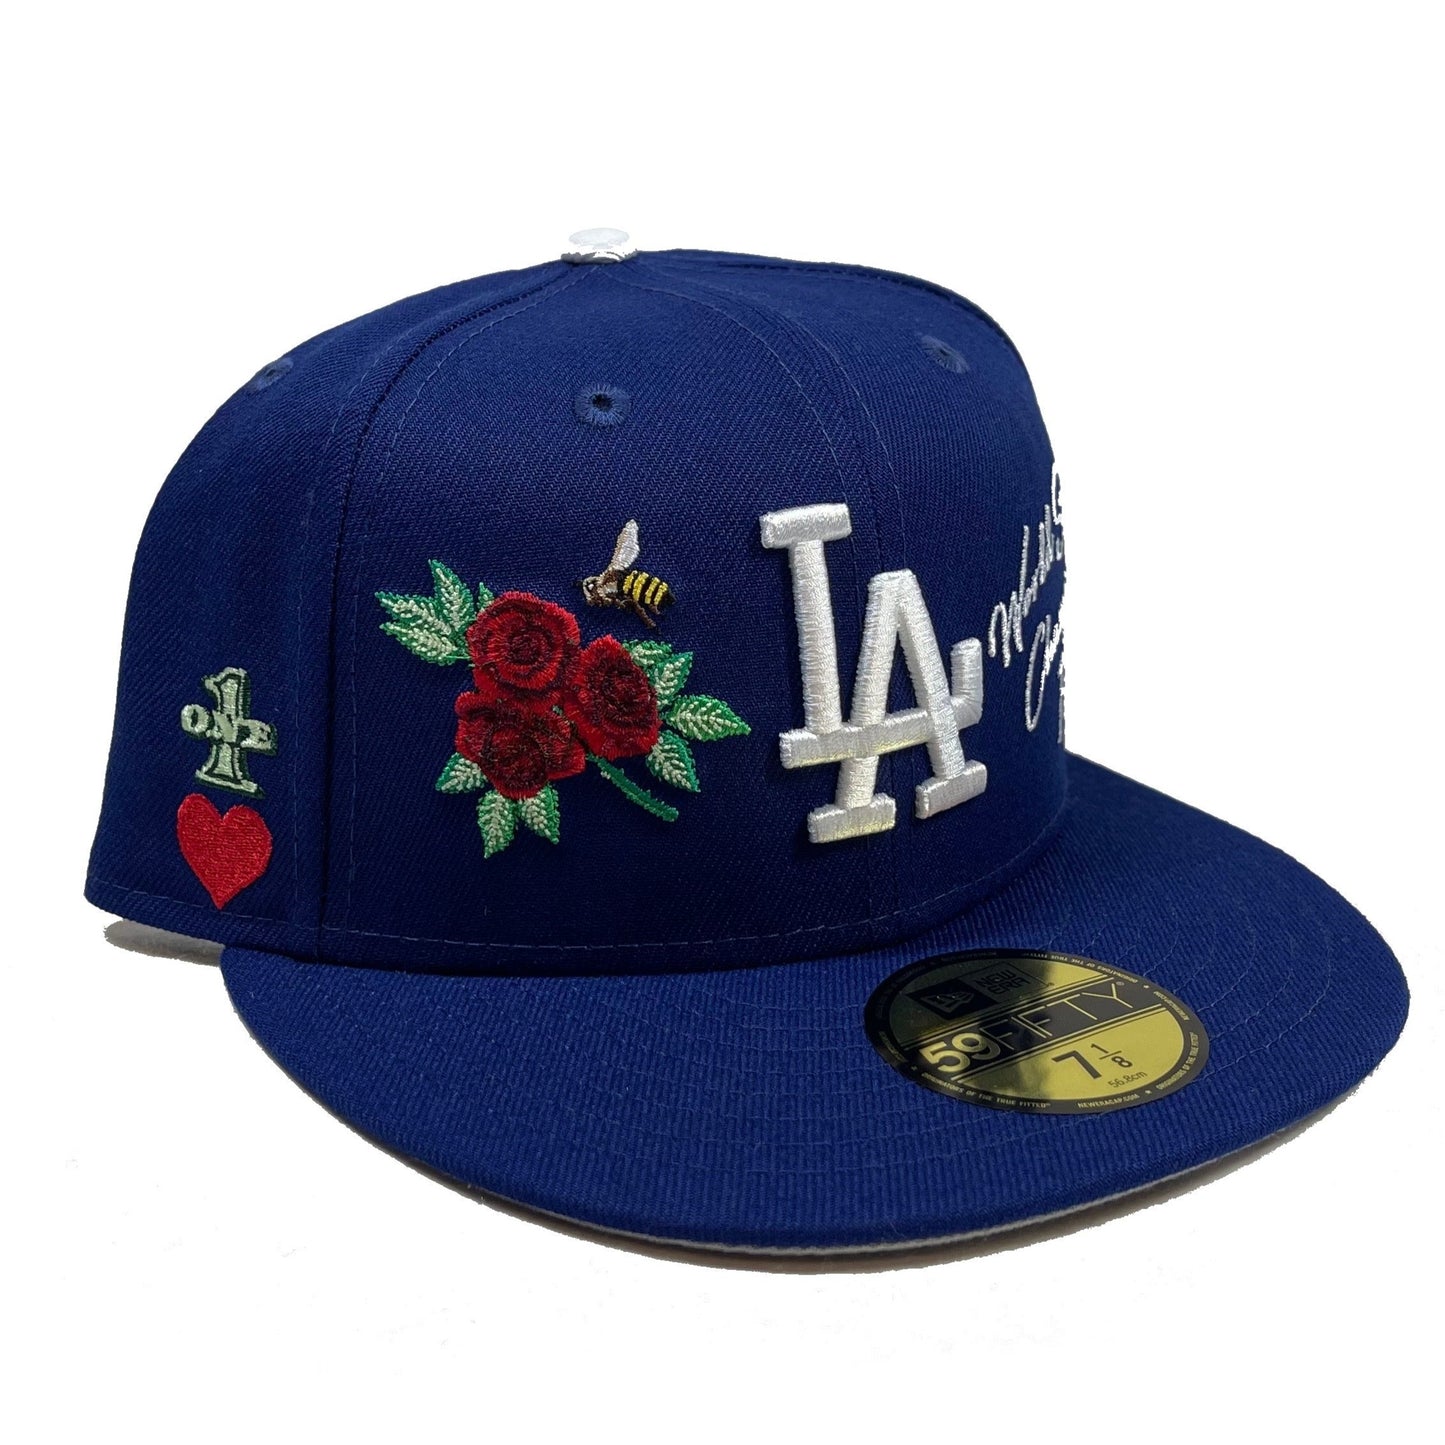 Los Angeles Dodgers Patches (Blue) Fitted